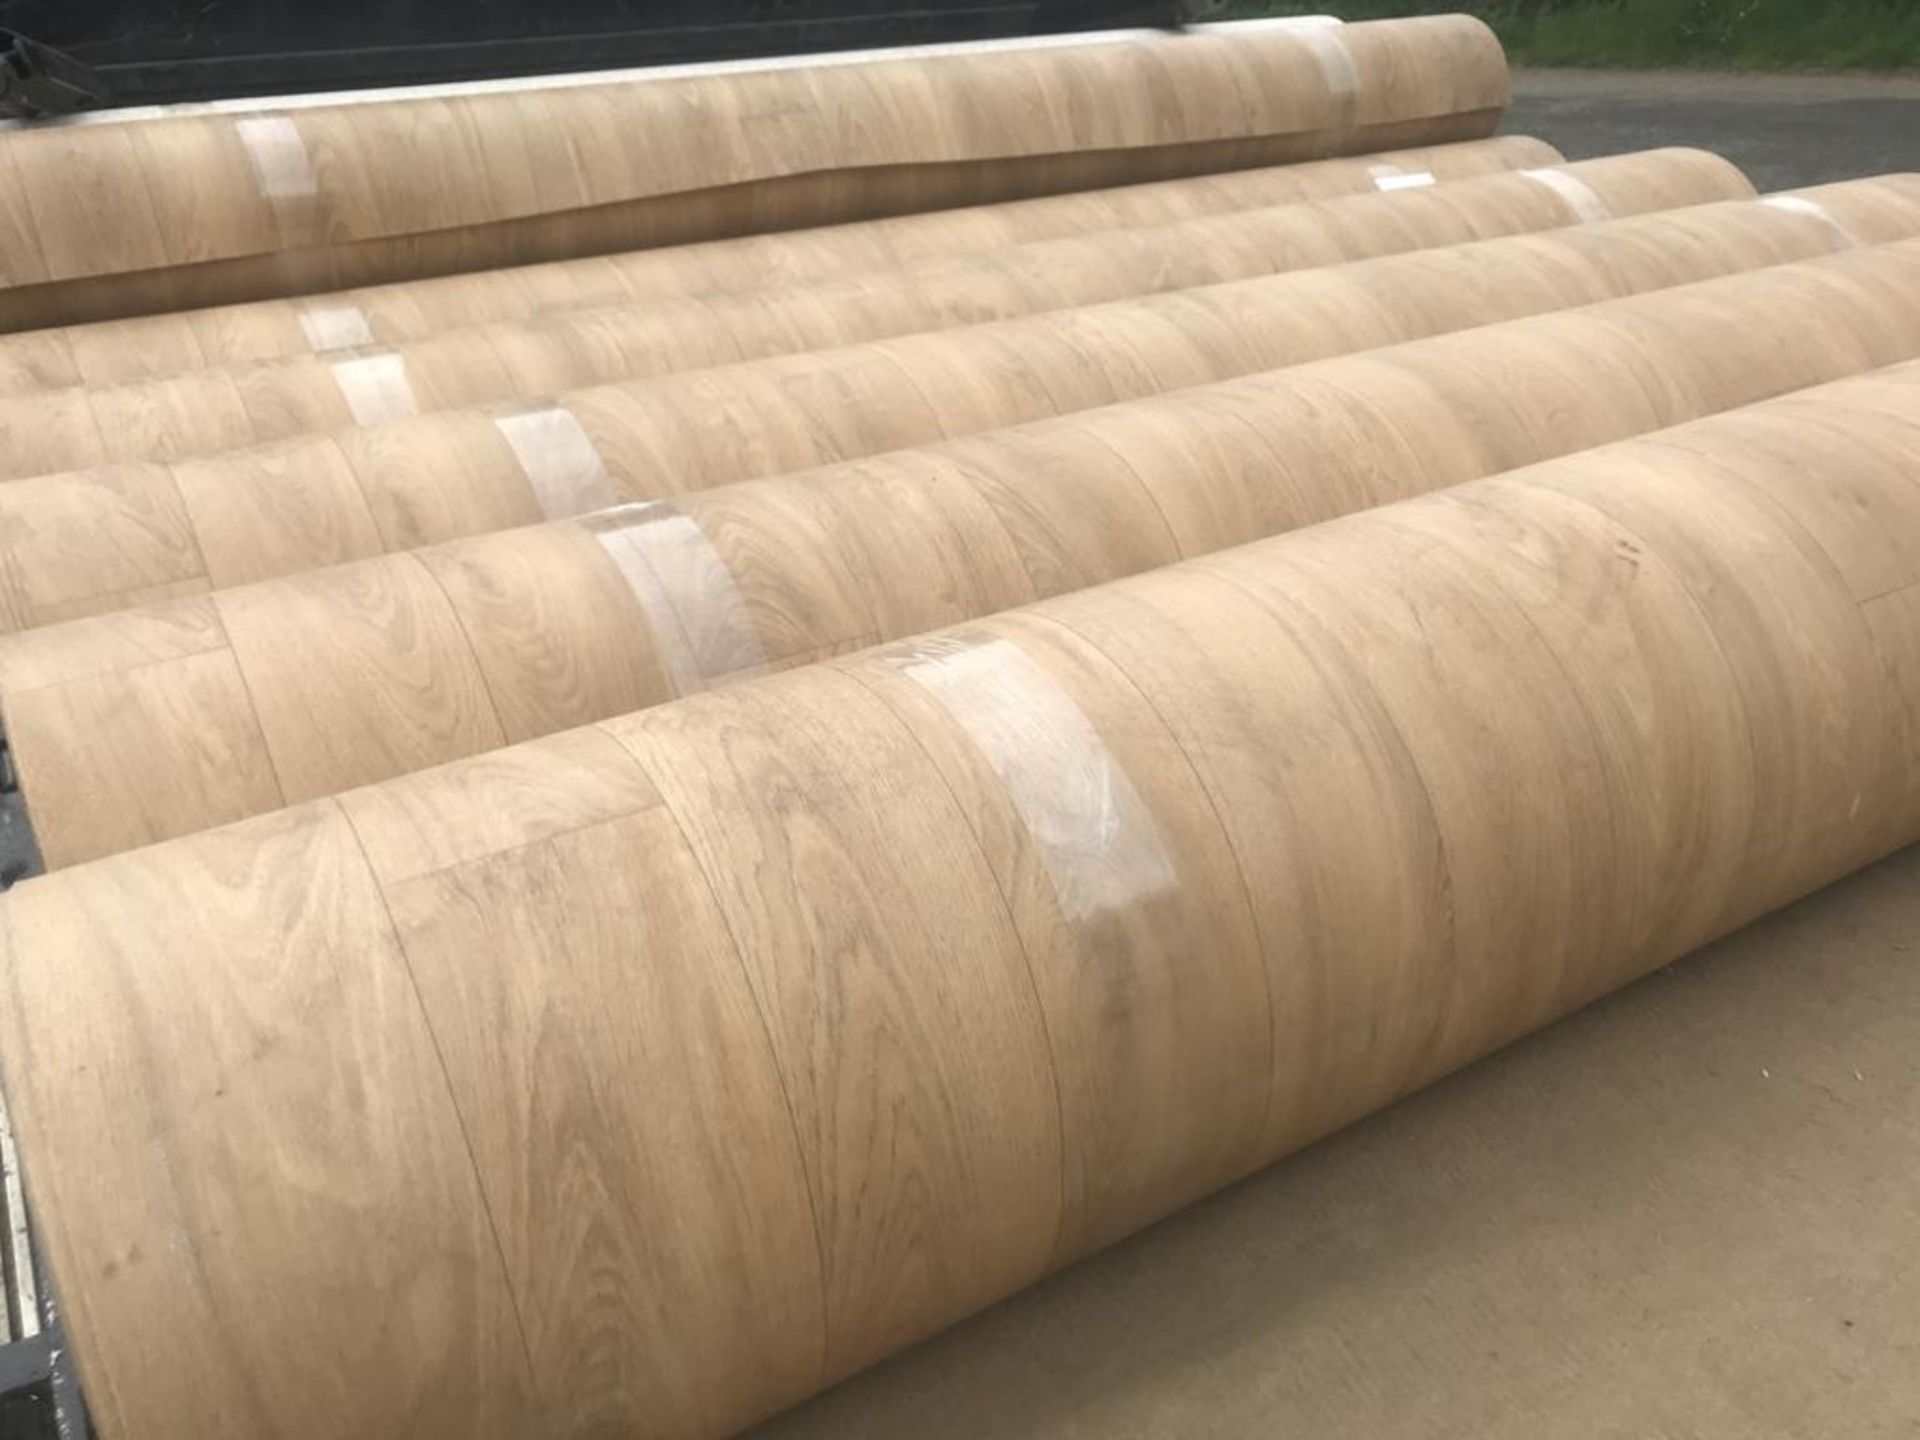 10x2m Heavy Duty Safety Flooring Colour Natural Oak     10x2m total 20m2 per Roll heavy duty - Image 2 of 3